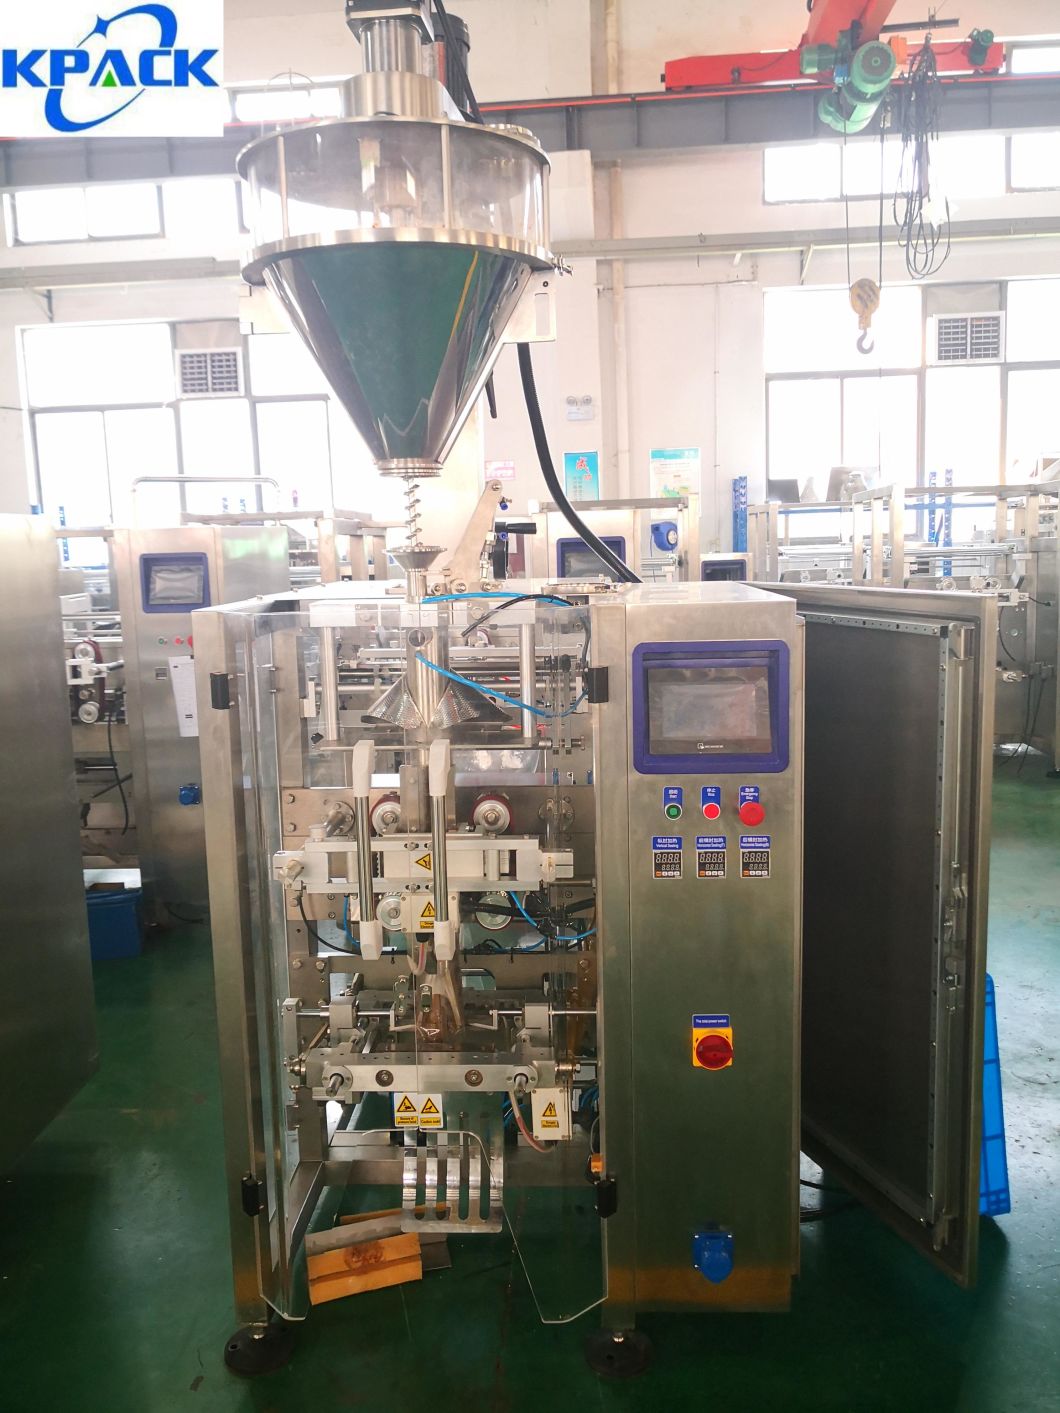 China Manufacturer of Powder Filling Auger Filler for Flavouring Powder Vffs Pouch Filling